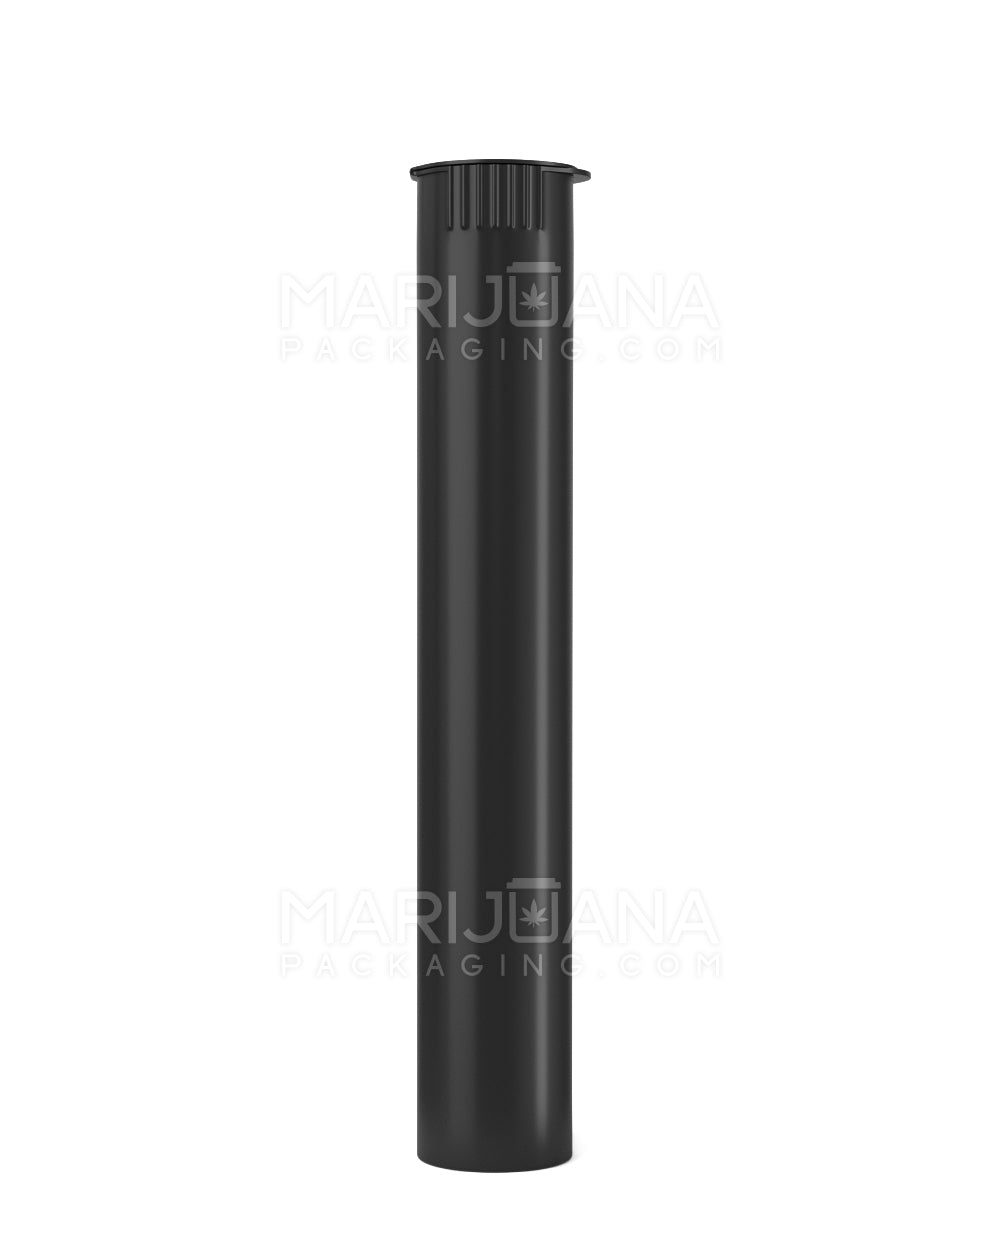 Child-Proof Joint / Blunt Tube Container Black 98mm - THC (Toronto Hemp  Company)